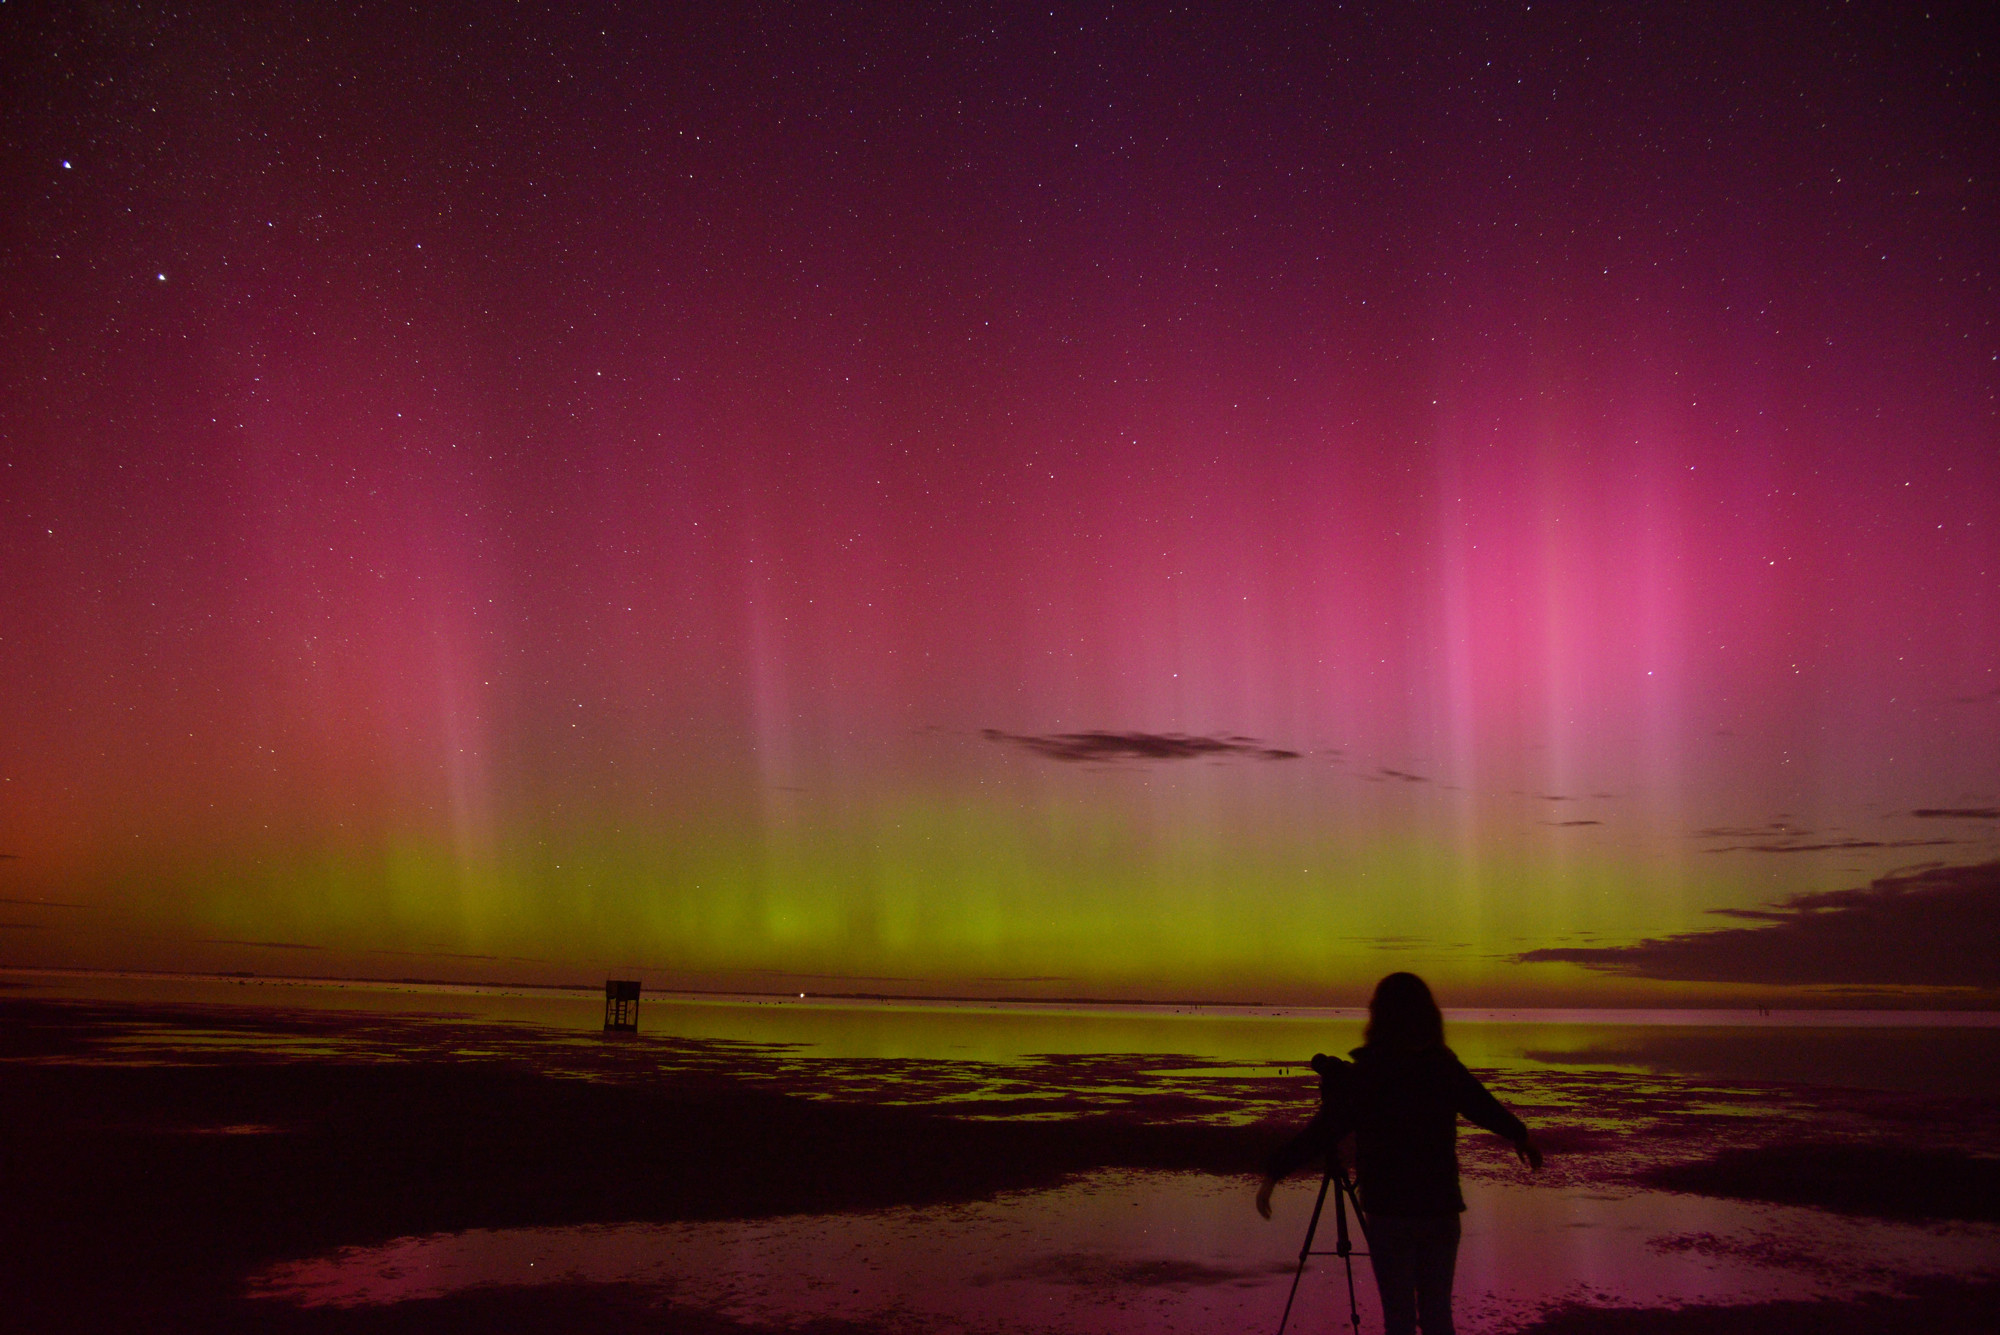 Where to see the Aurora in Melbourne